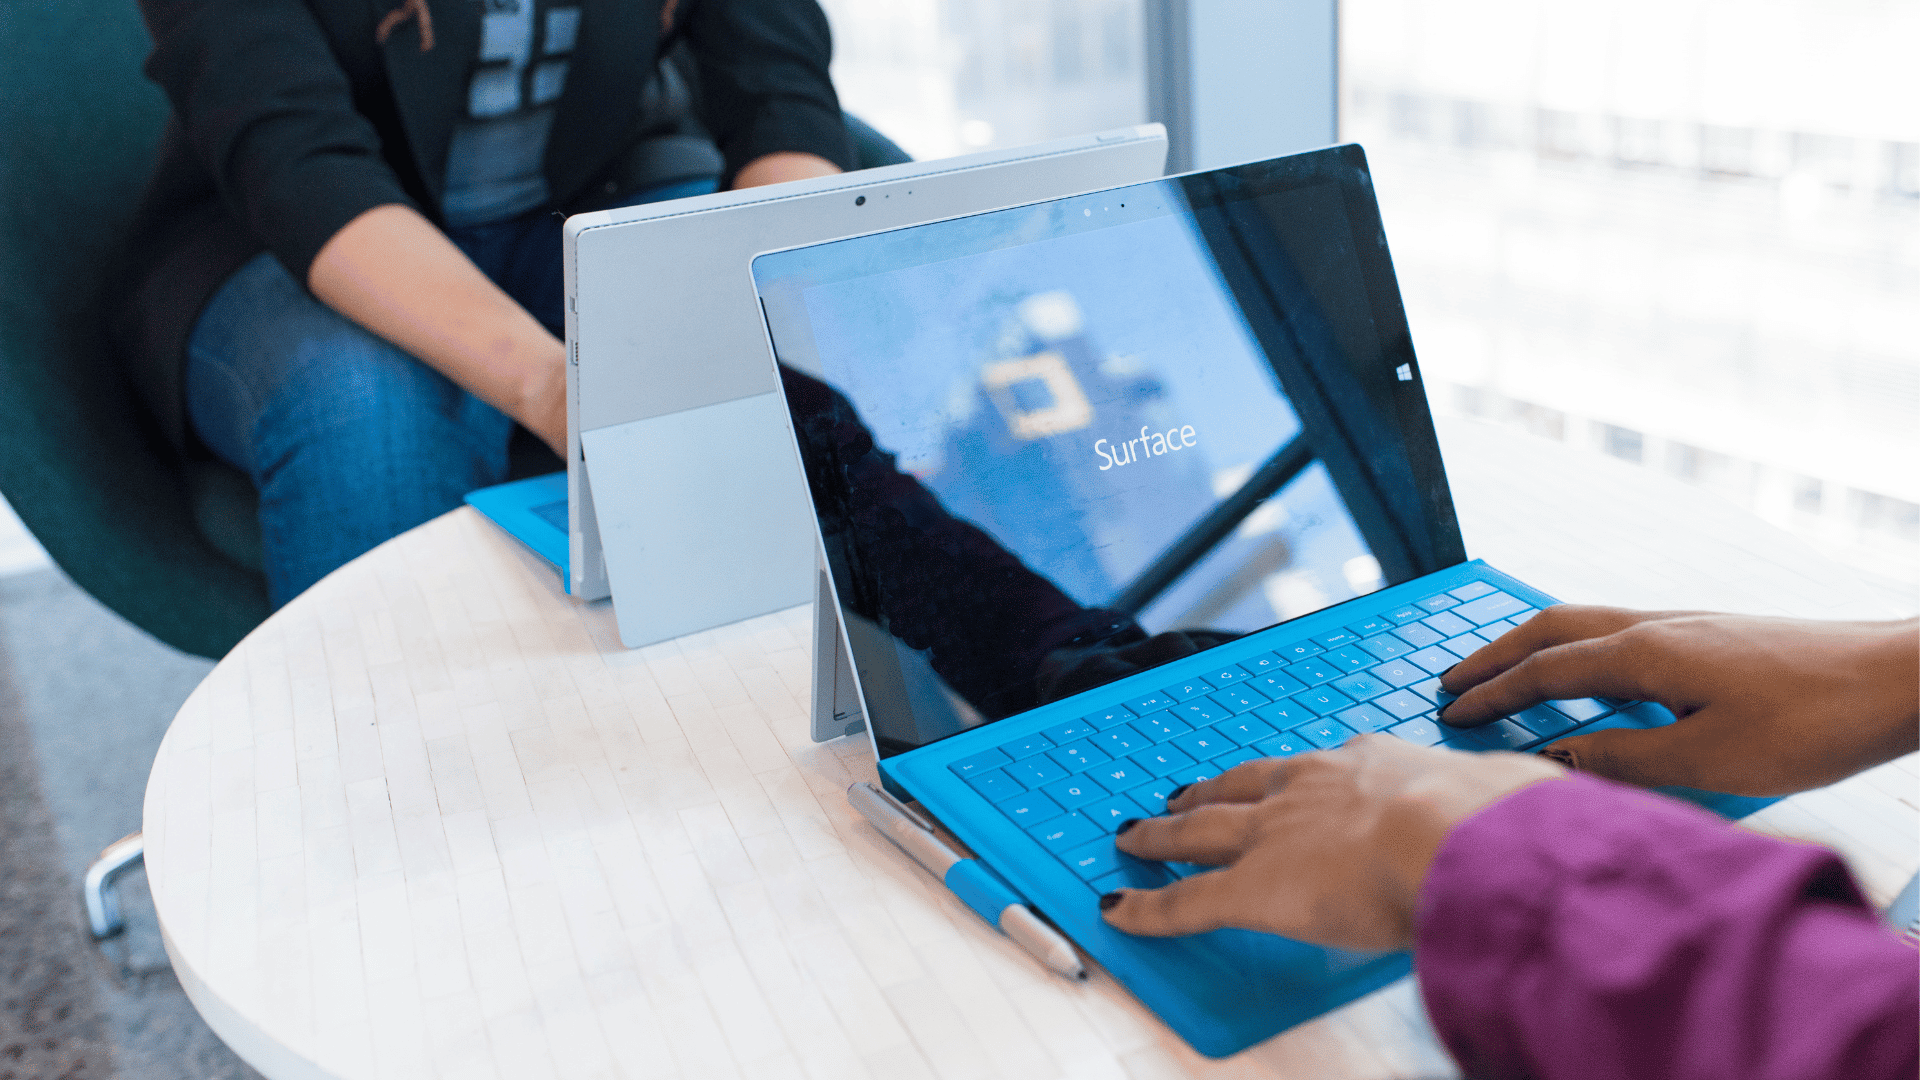 Get to know the best software for Windows 10